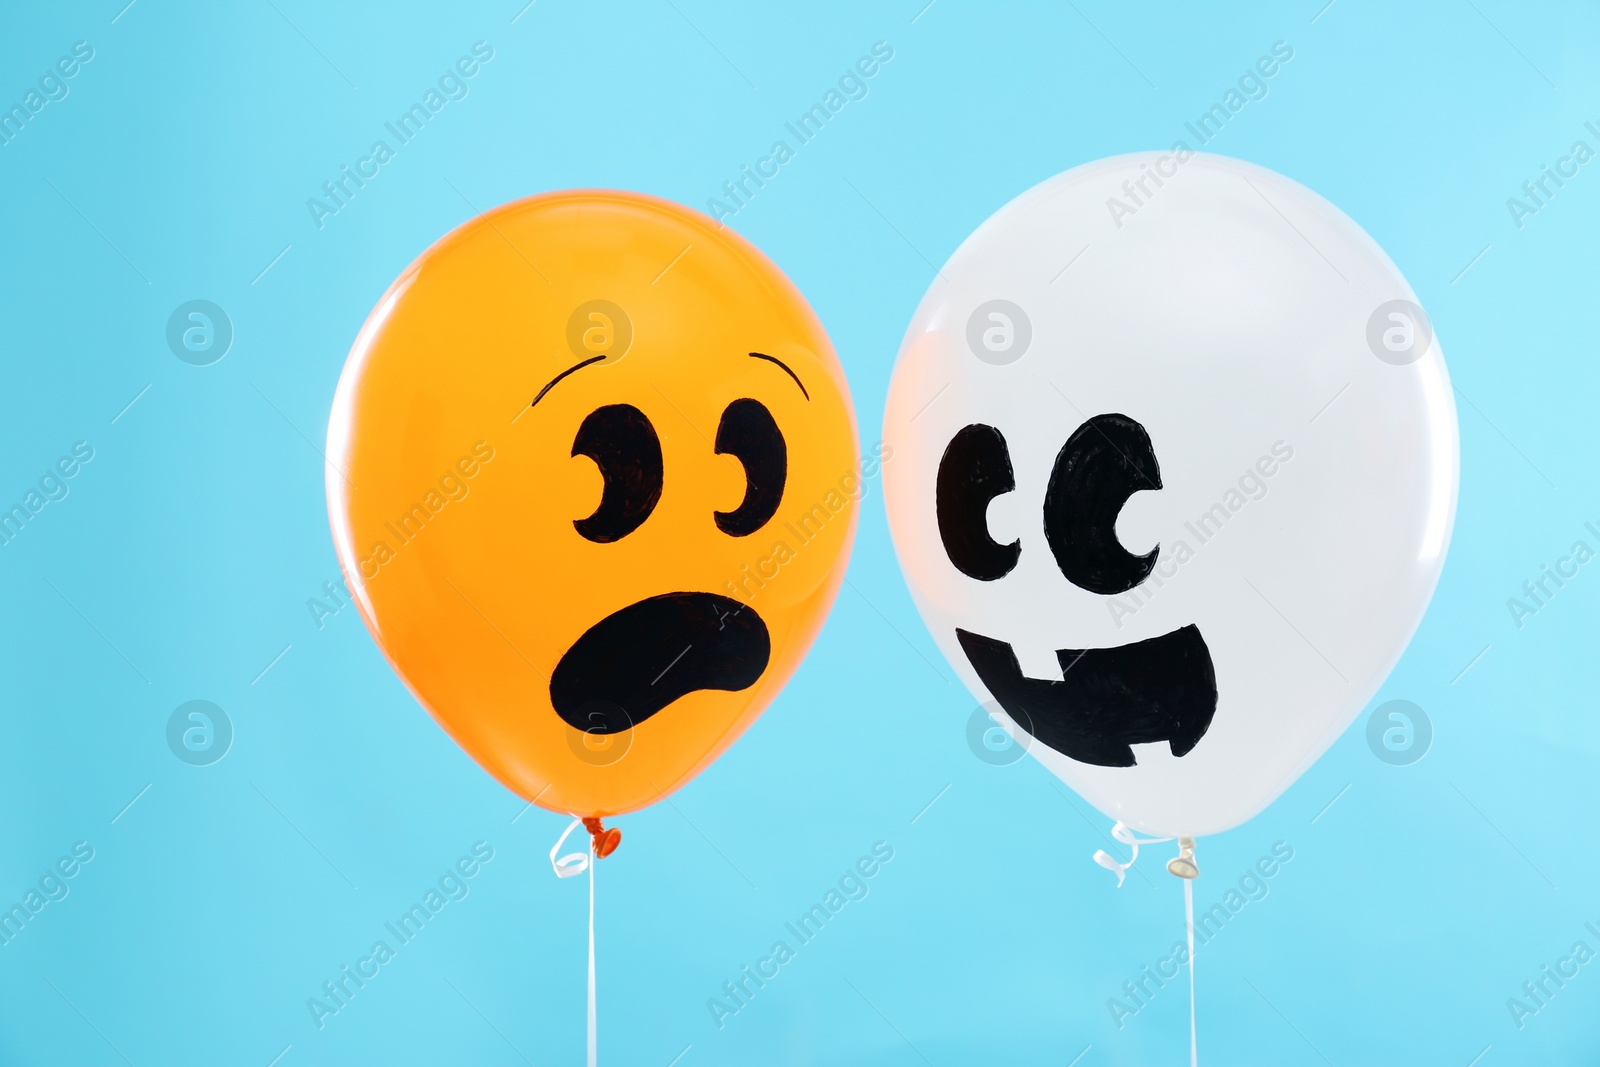 Photo of Colorful balloons for Halloween party on blue background